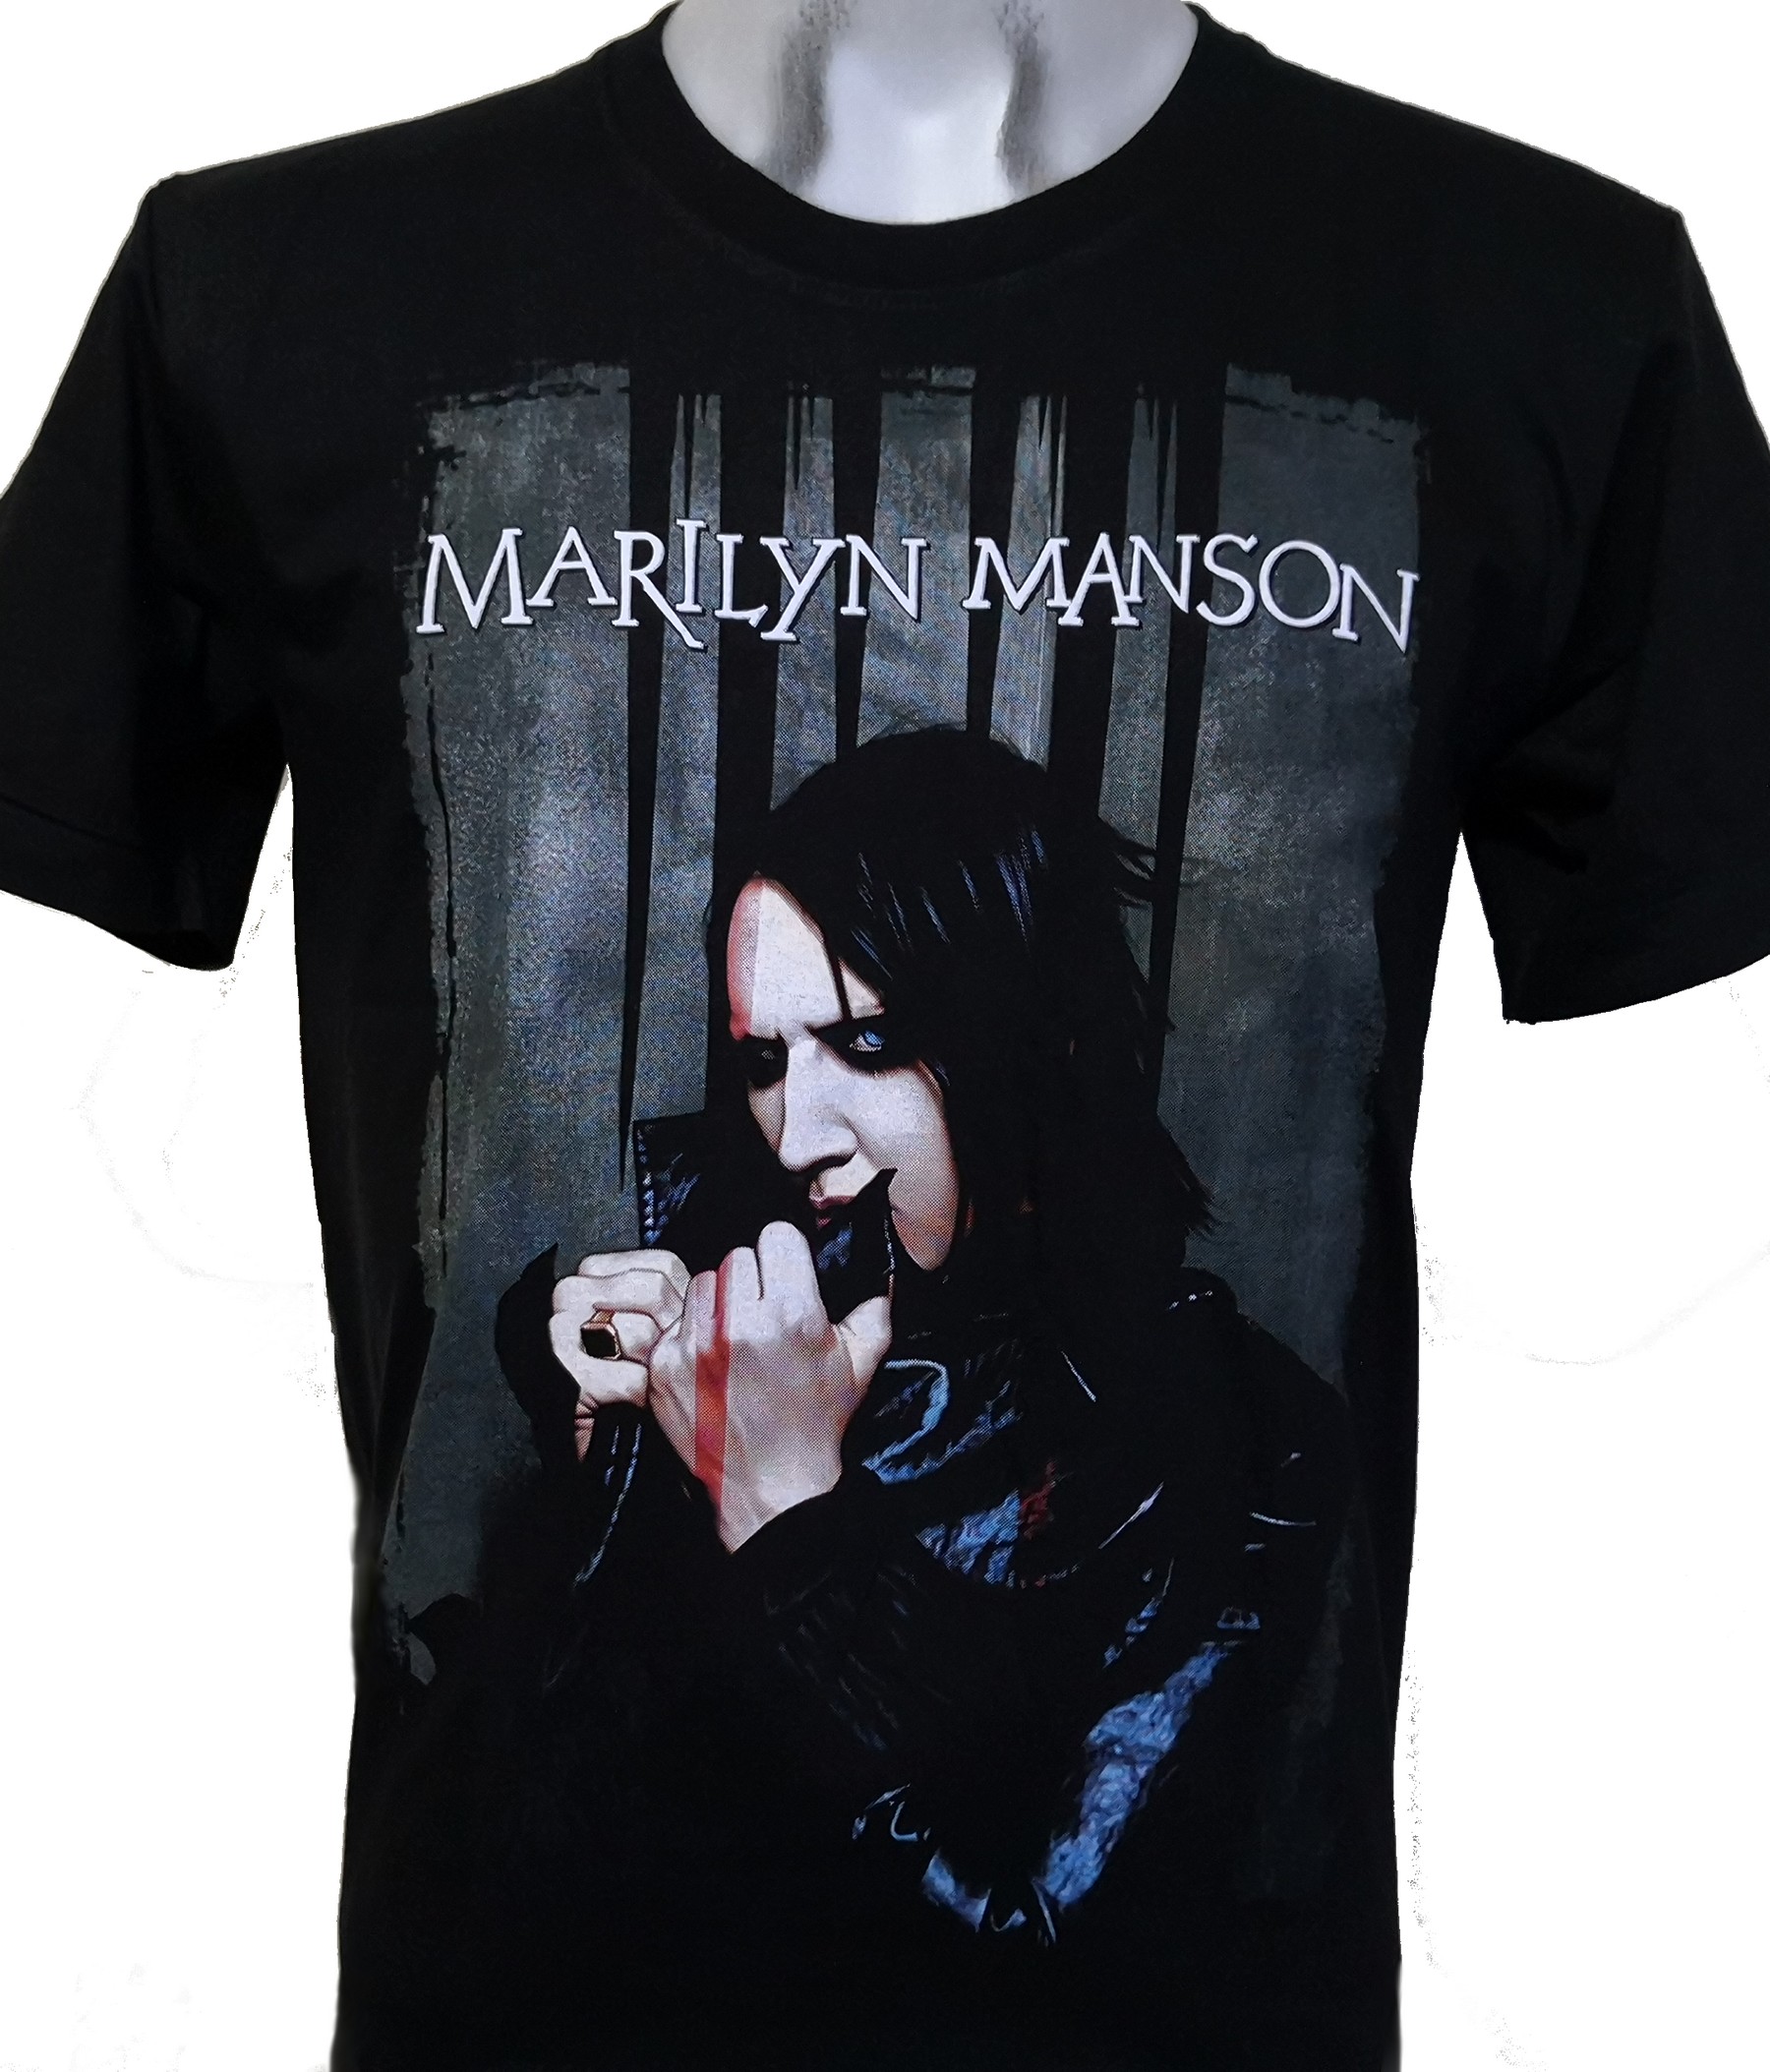 M Xl 3Xl Available in Size S 2Xl Marilyn Manson Shirt l